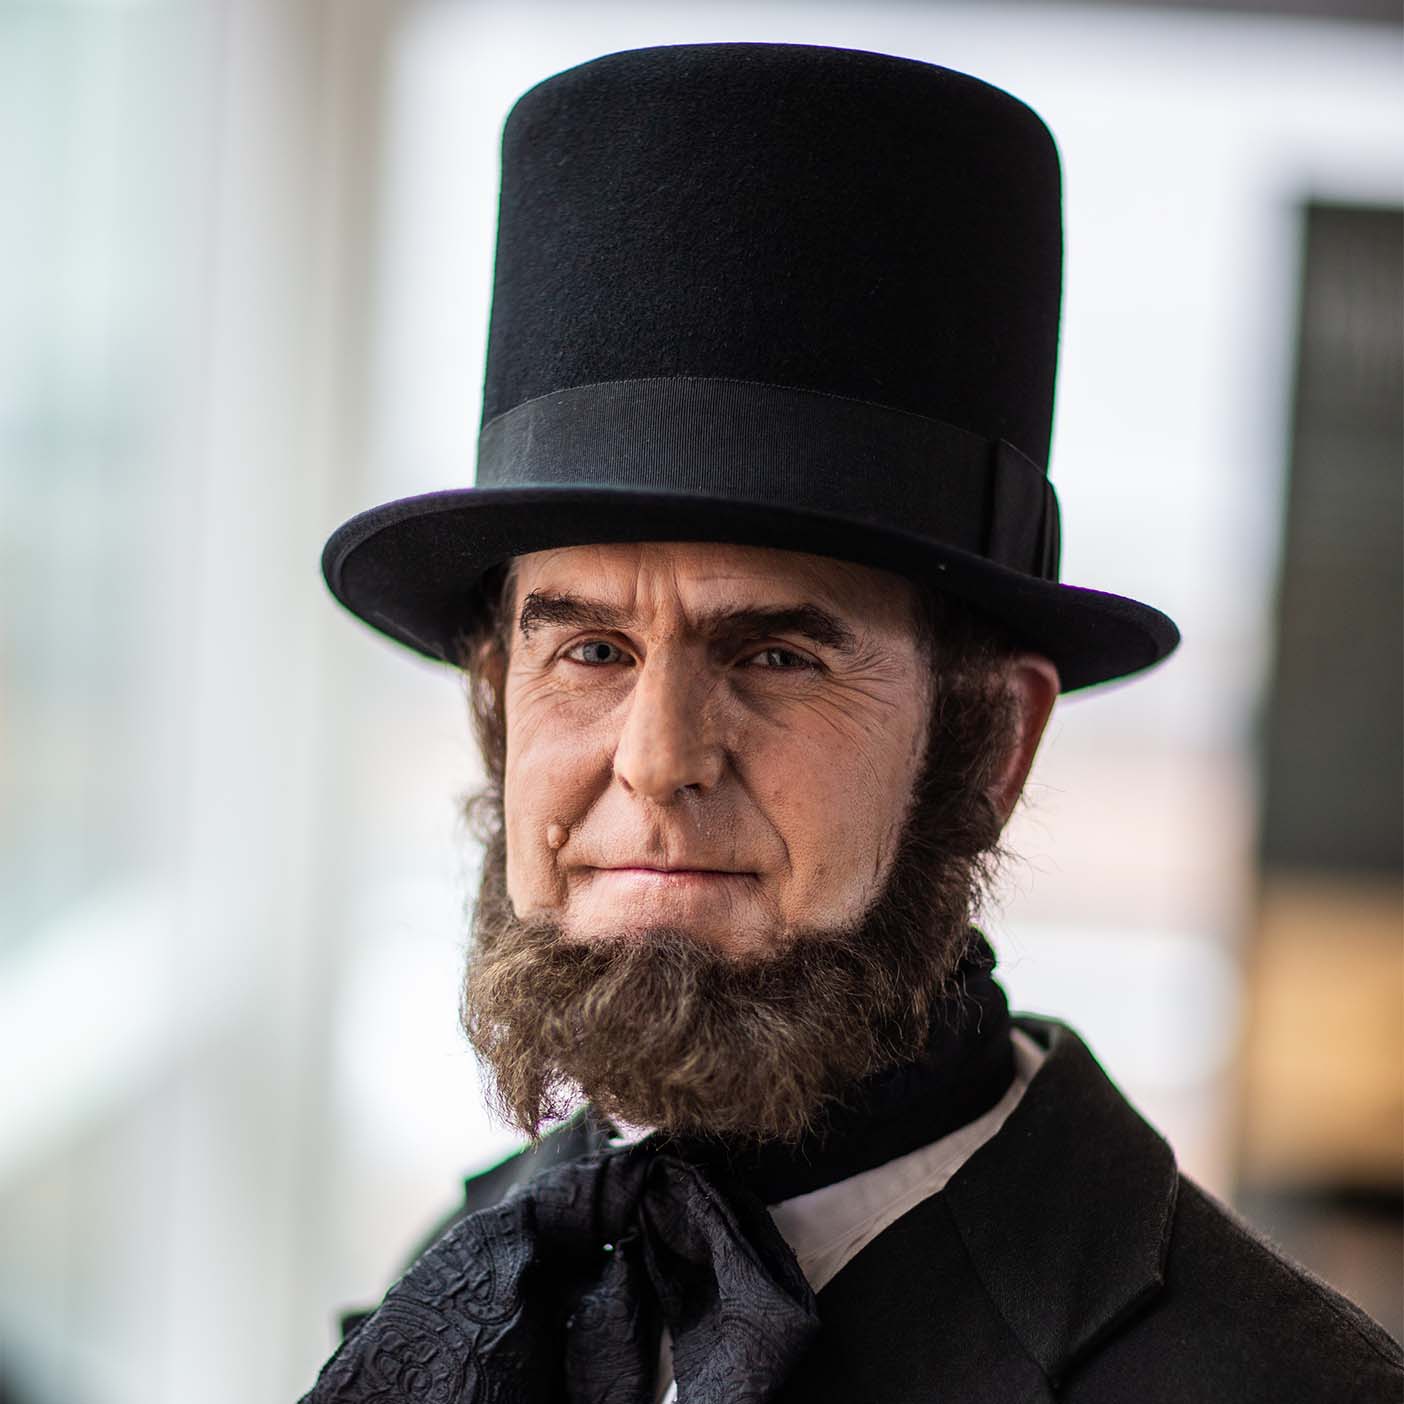 Tom Holmoe dressed up as Abraham Lincoln for Halloween..